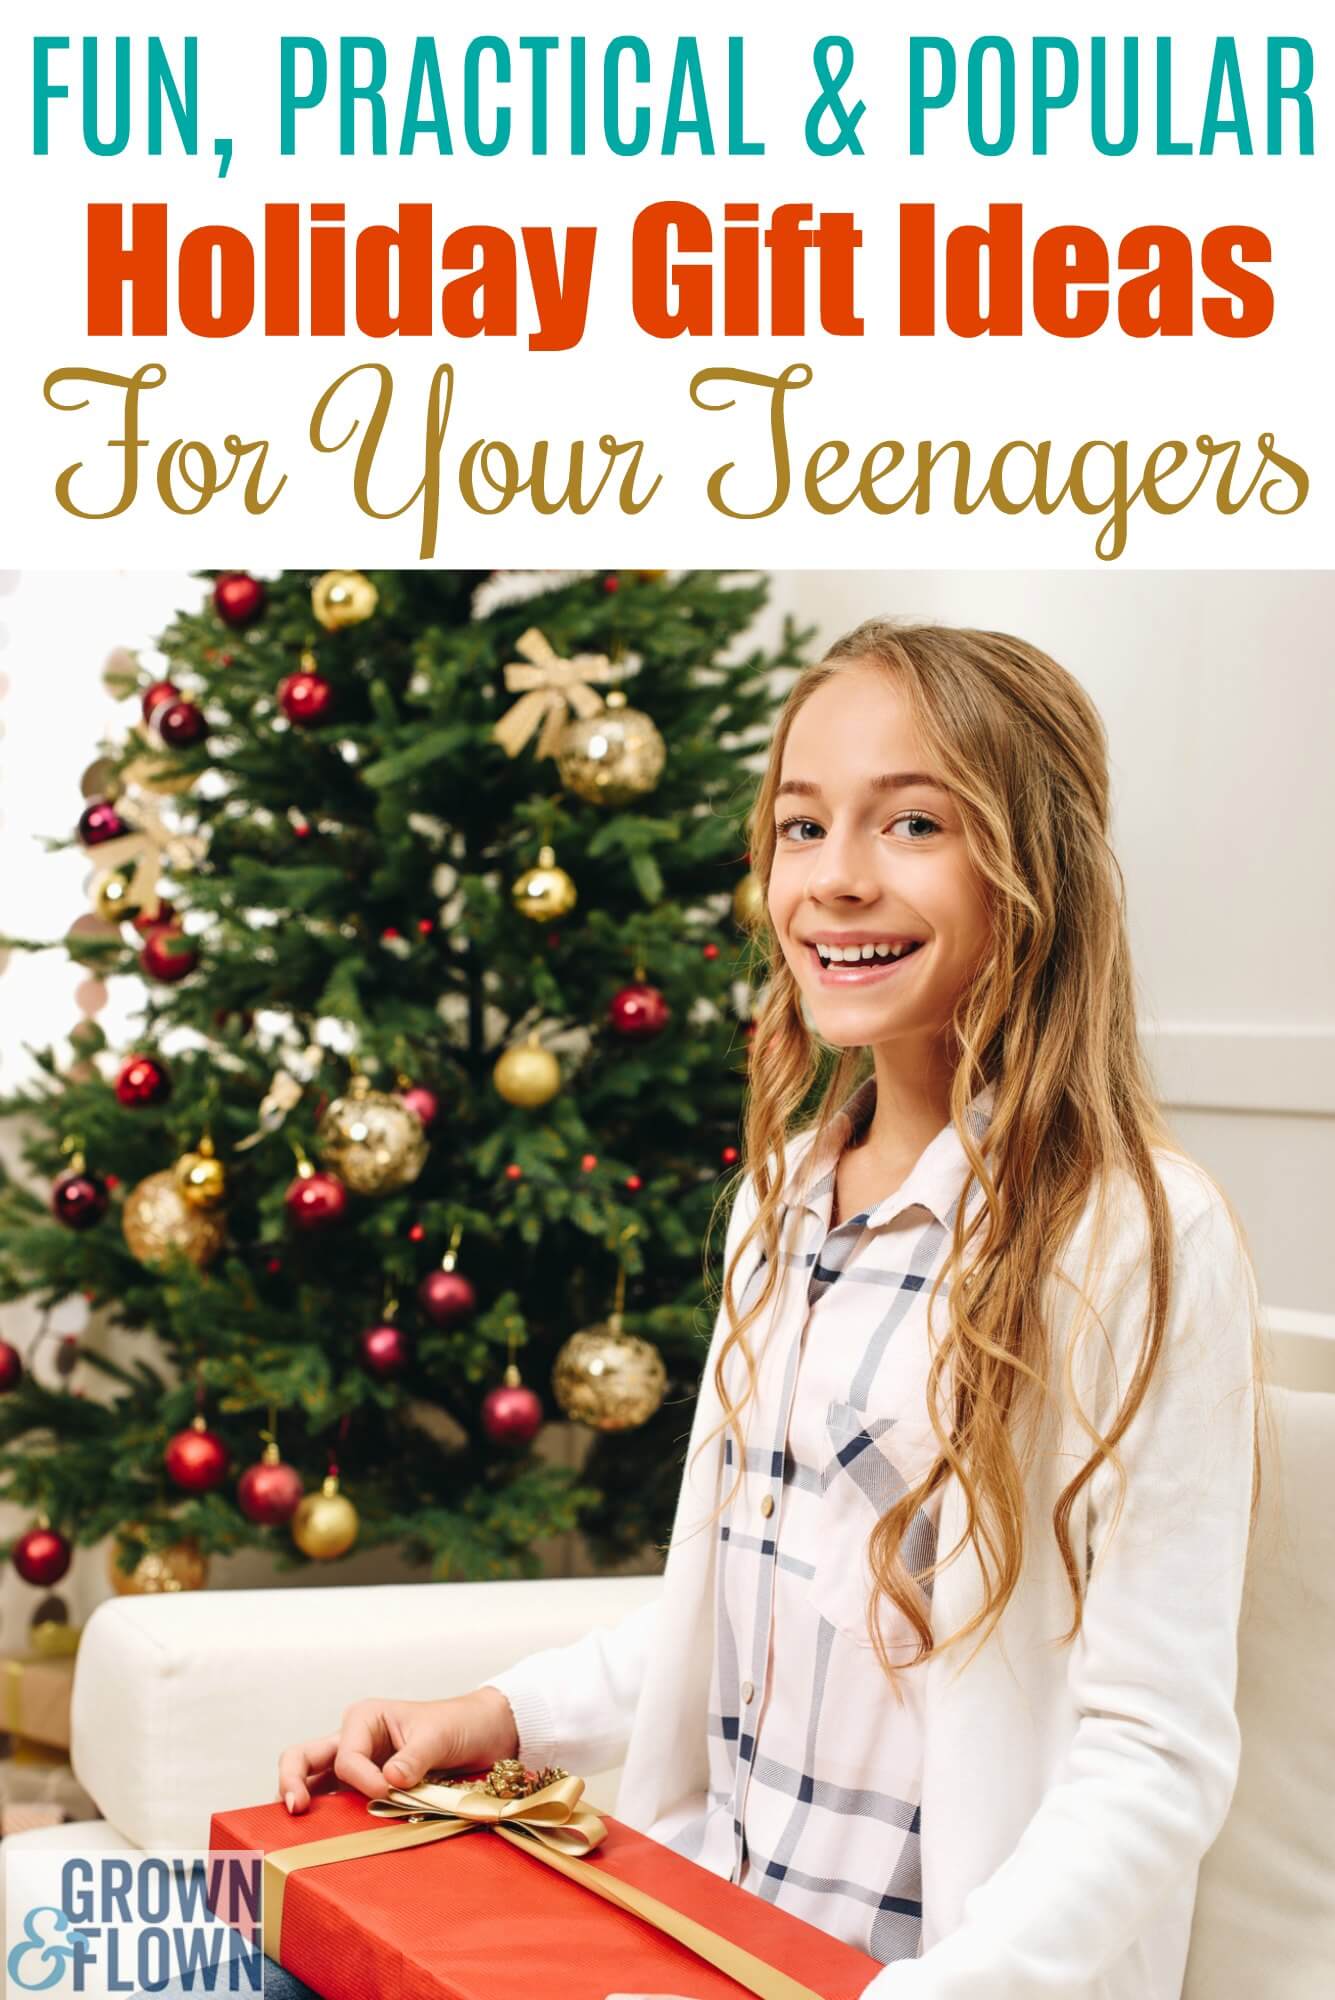 Teenagers are hard to shop for and sometimes when the holidays roll around, it can become tricky picking out presents for your teen. These gift ideas for teens are fun, practical and popular and are sure to make your teenager happy. #teen #teenagers #gifts #giftguideforteens #giftsforteens #giftideas